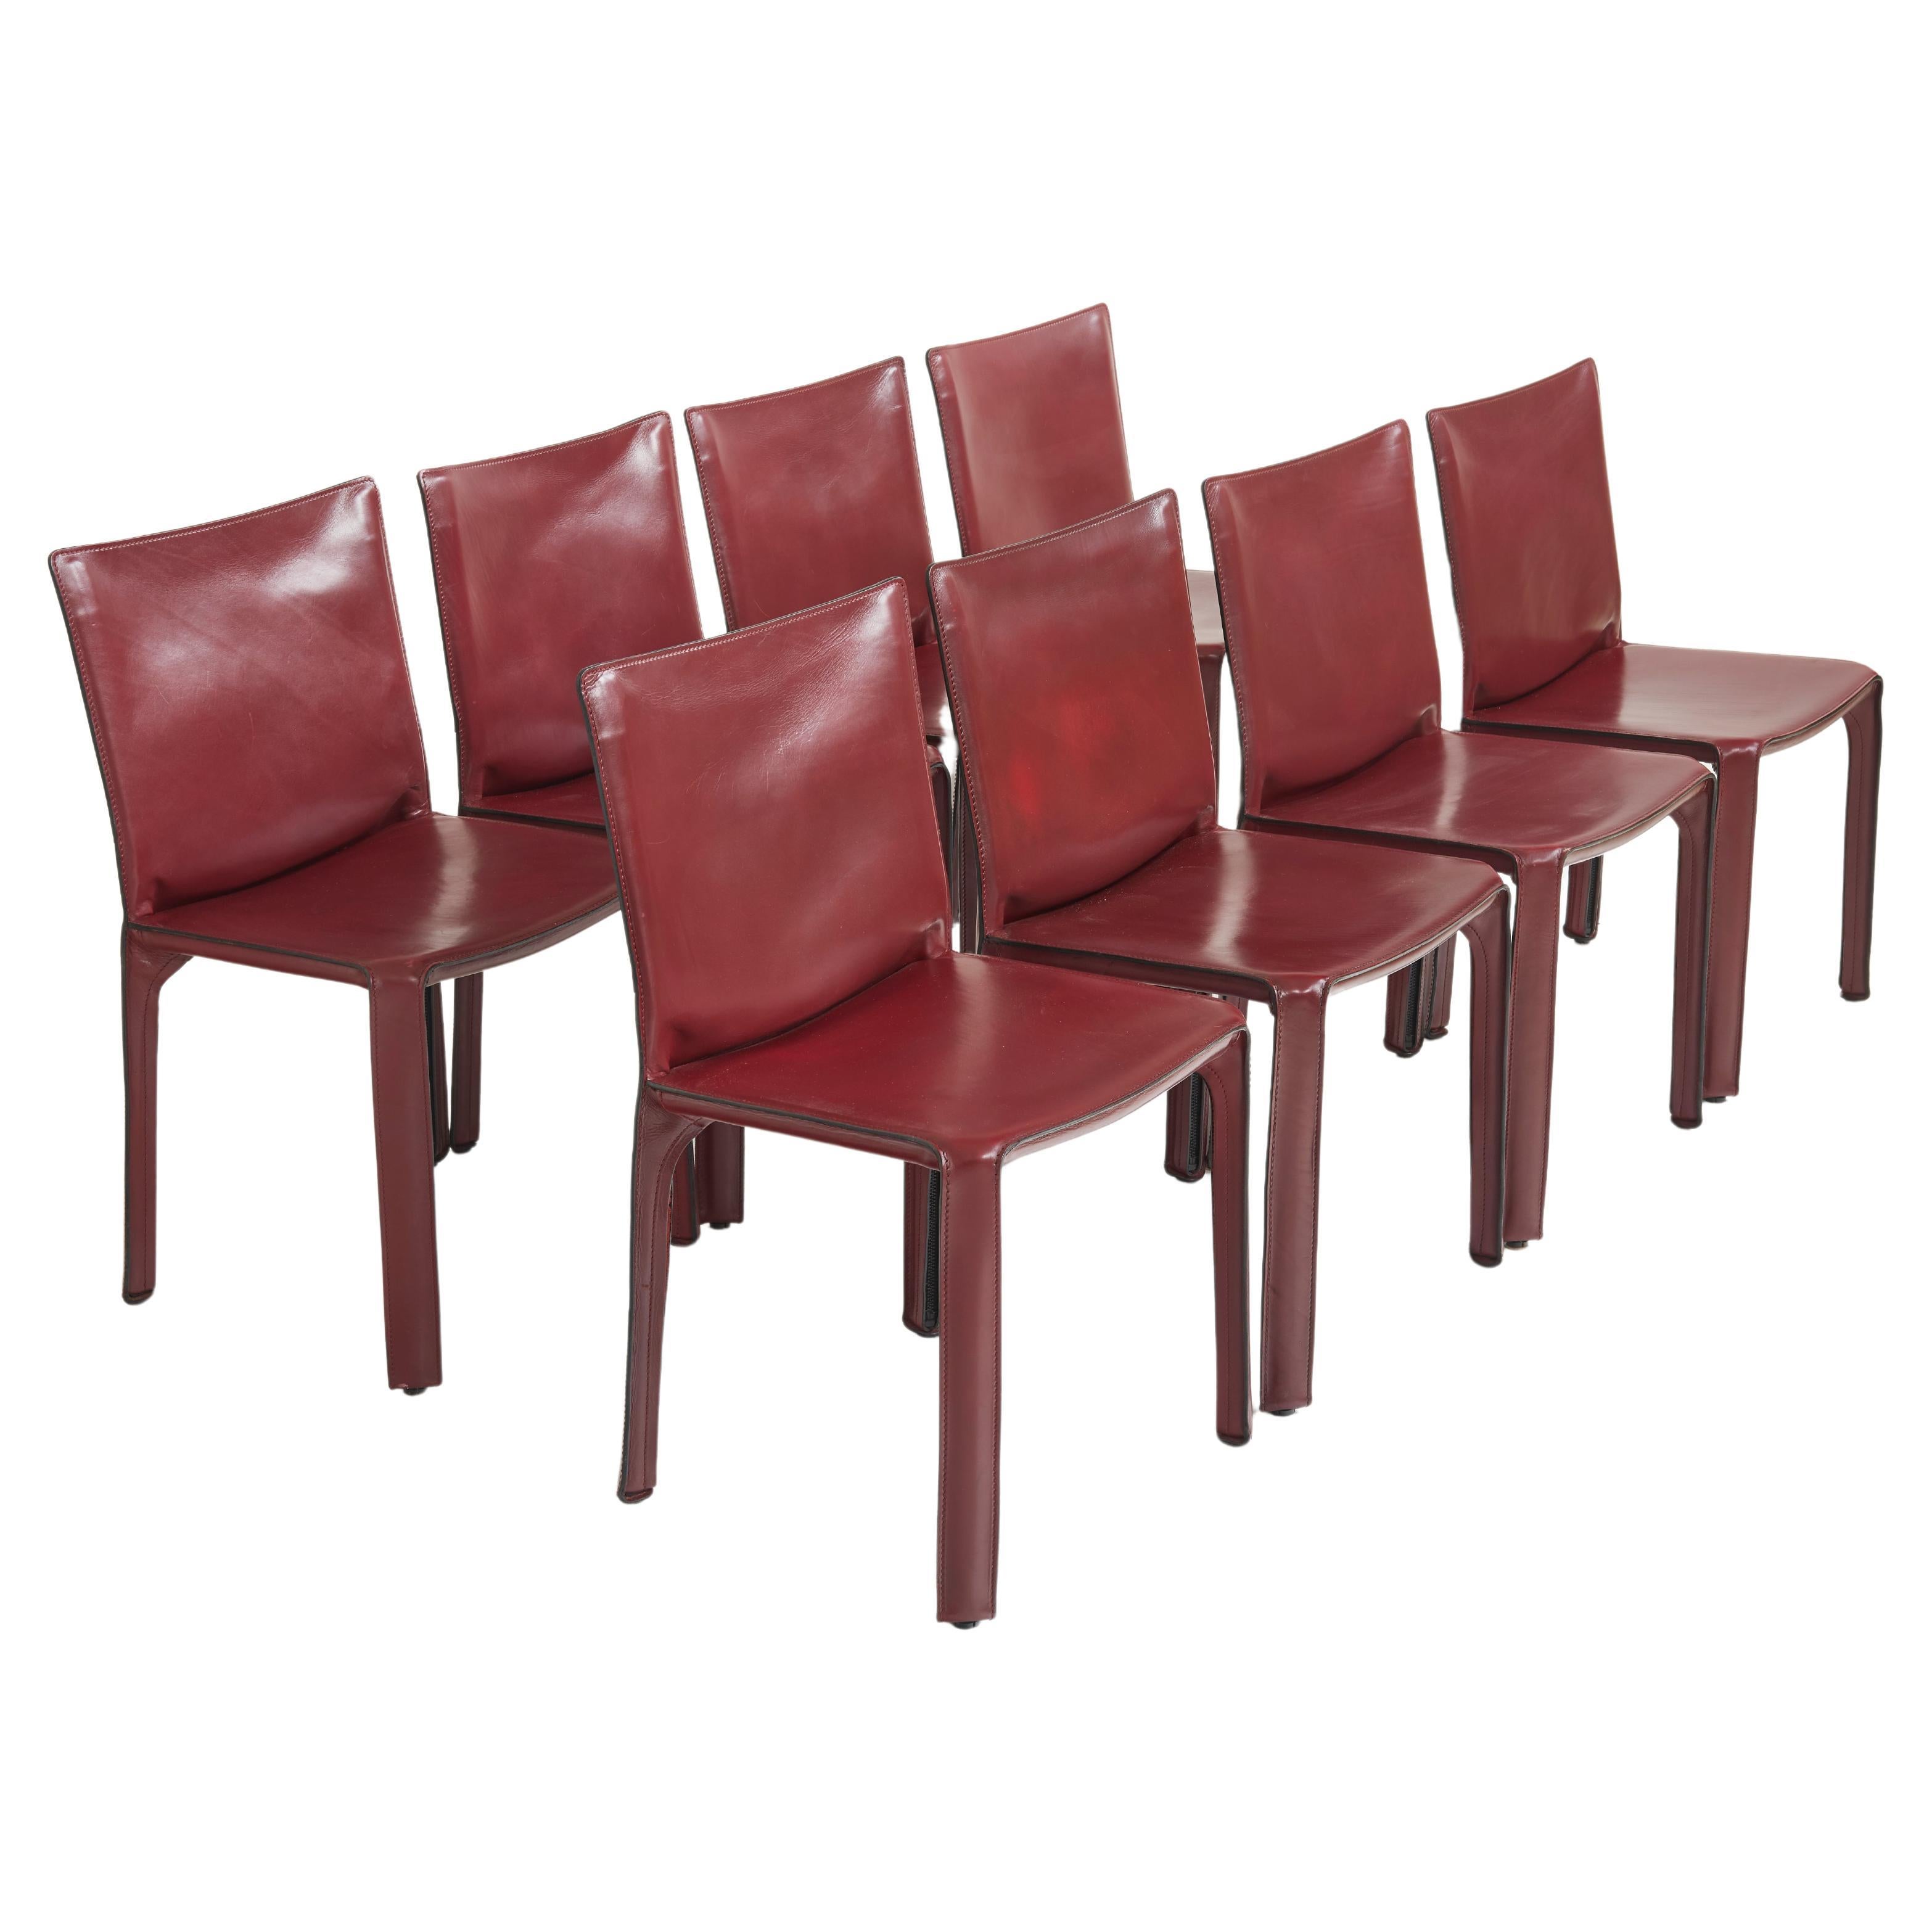 Set of 8 CAB burgundy leather chairs by Mario Bellini for Cassina, Italy 